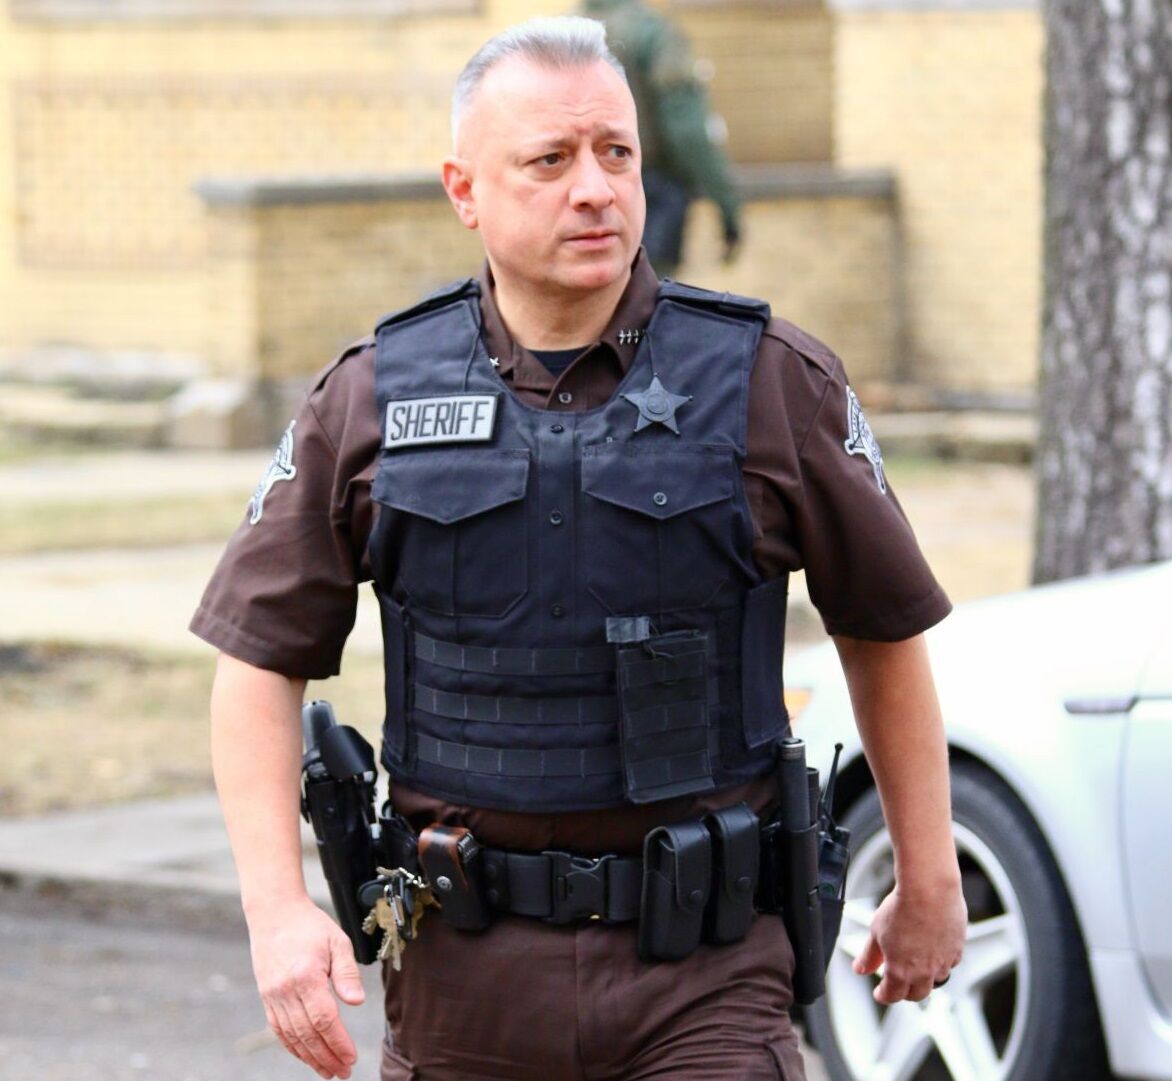 New Indiana law disarms indicted Lake County sheriff beginning July 1